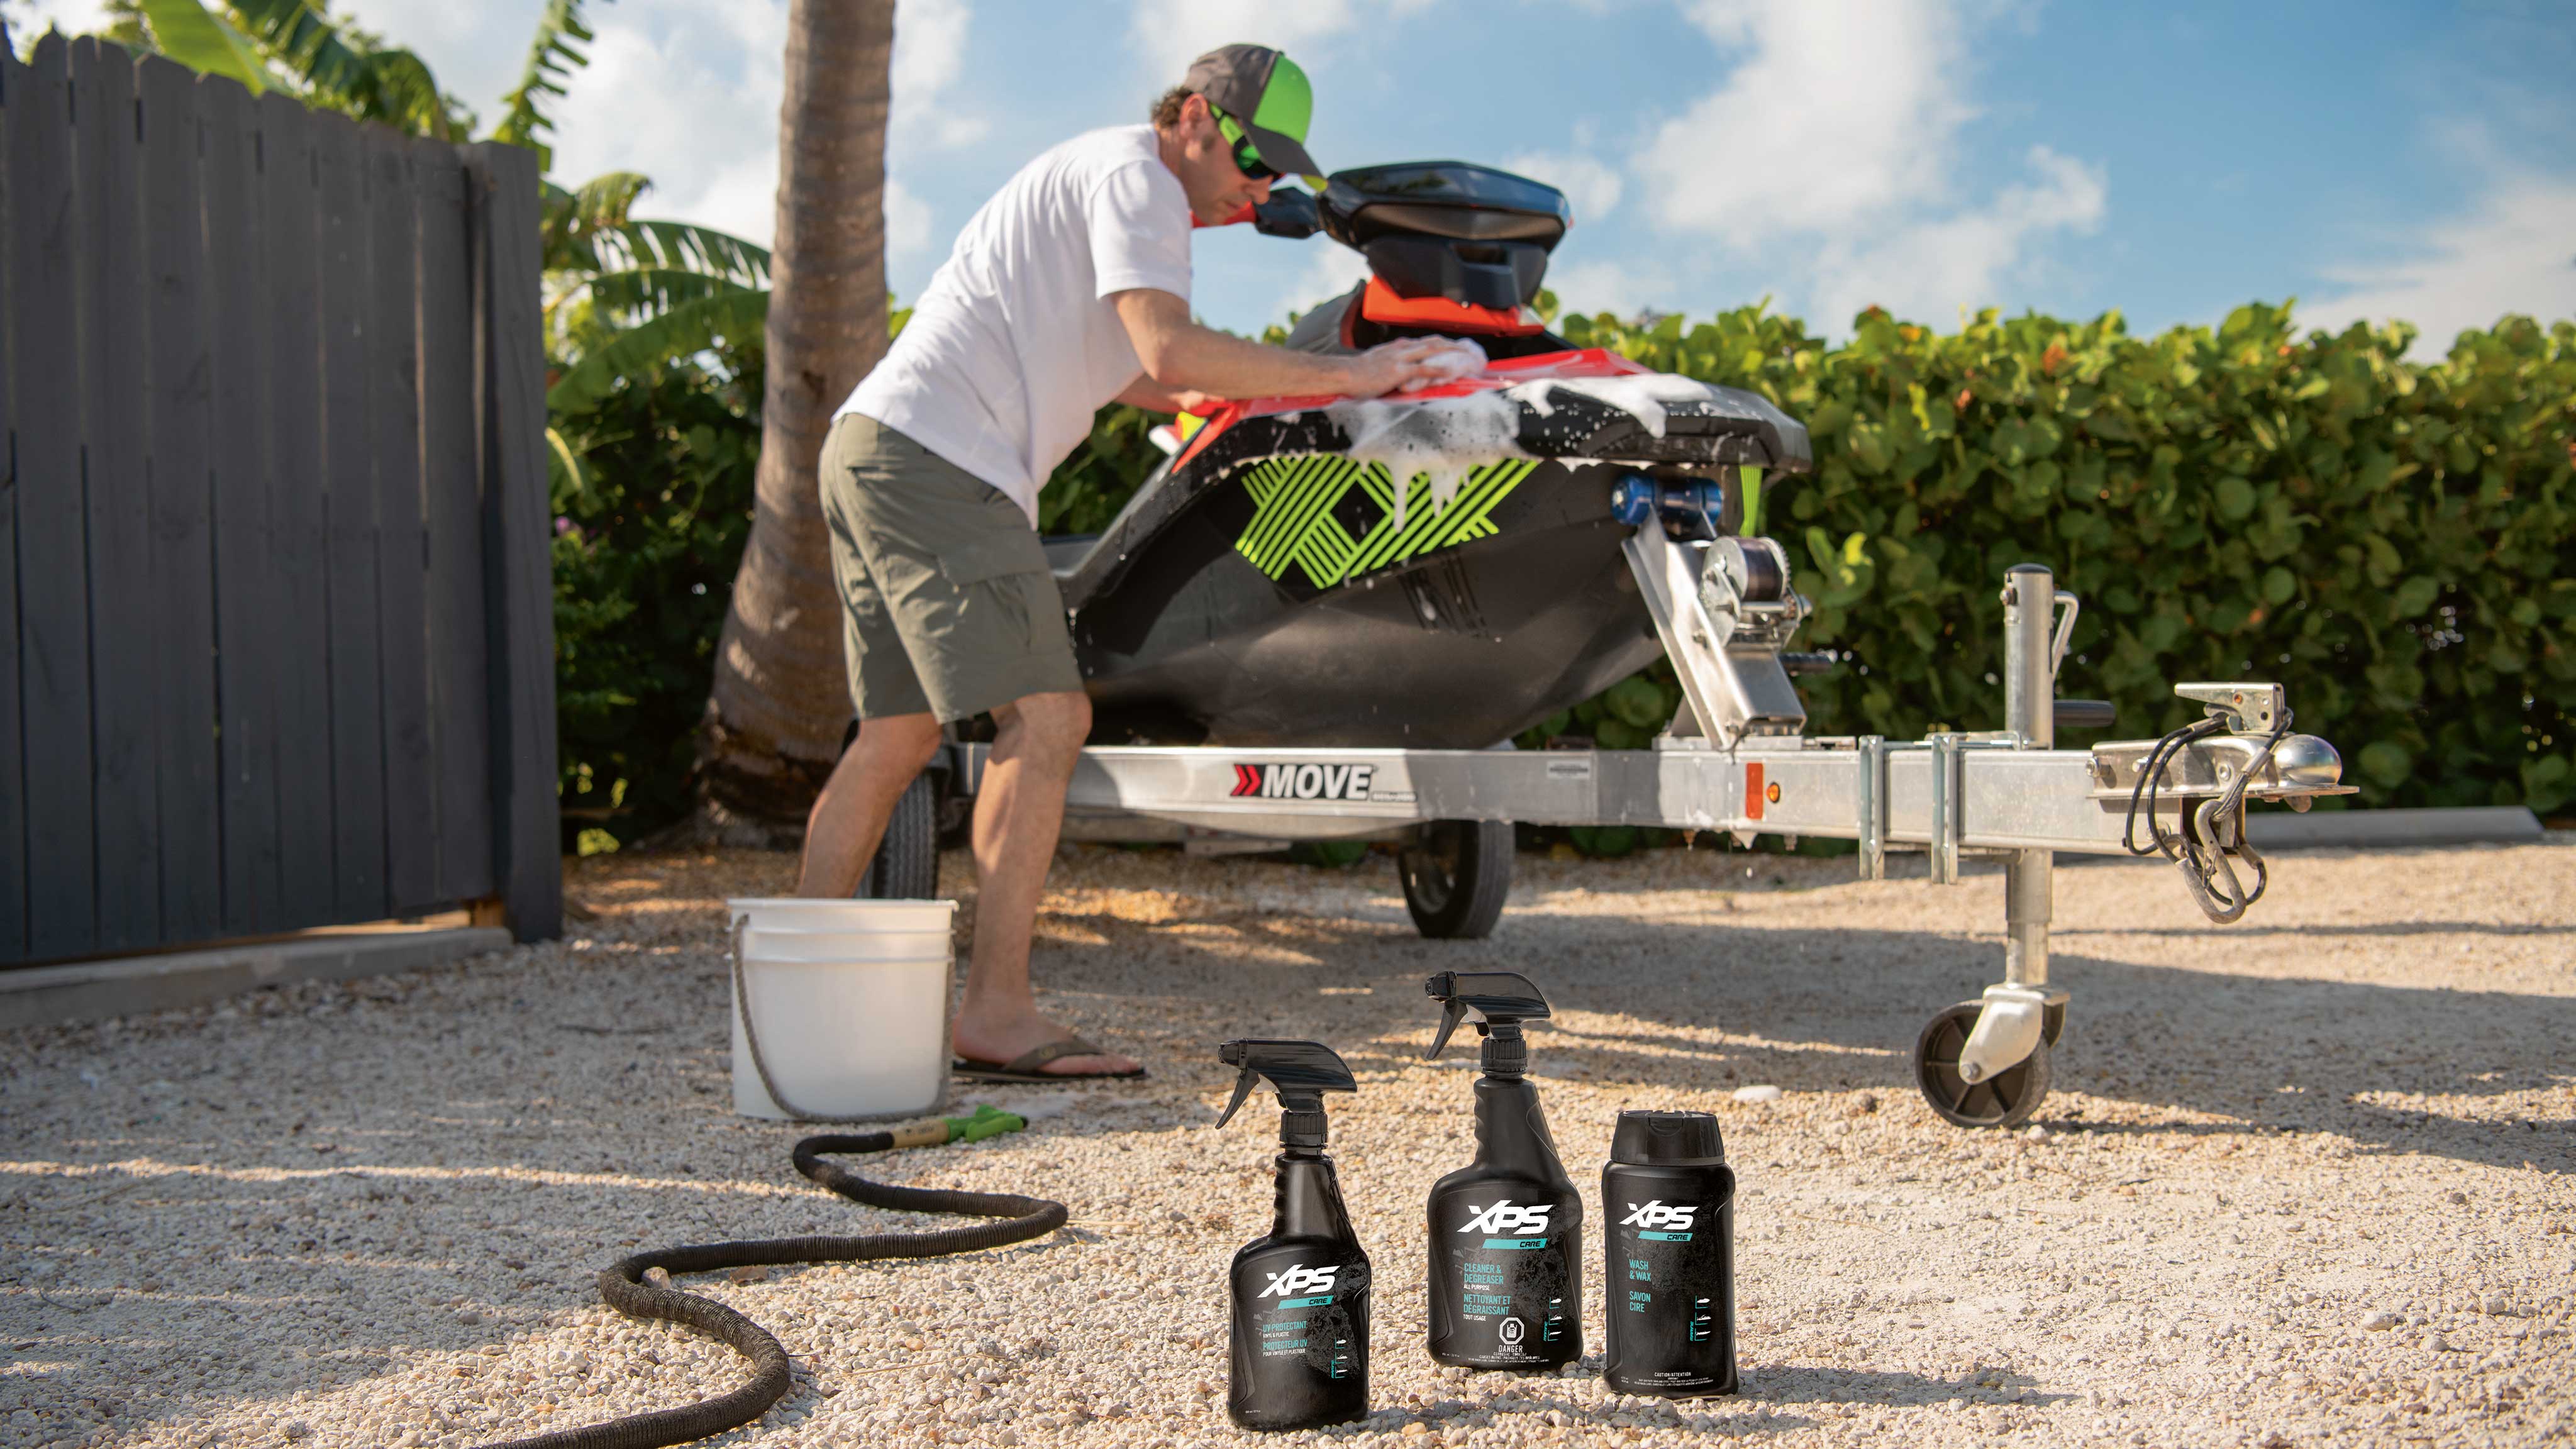 Men washing his Sea-Doo watercraft with XPS Care products